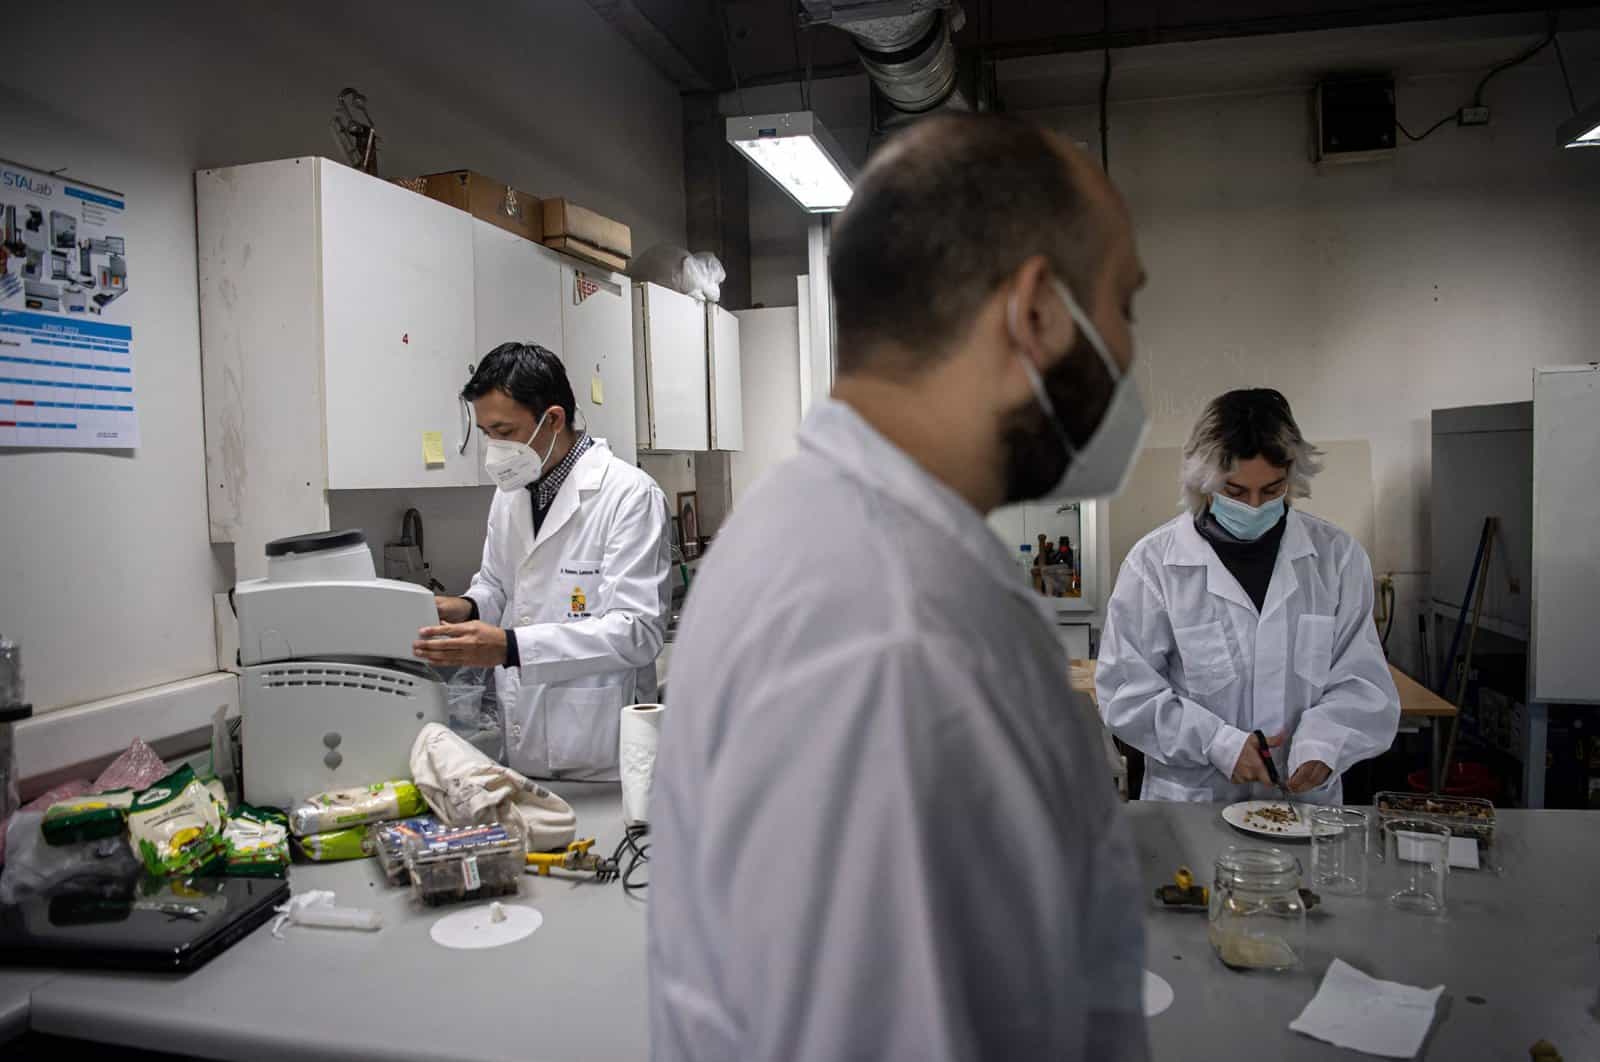 Food engineer Roberto Lemus (L) and food engineering students Marcelo Bertran (C) and Alonso Vasquez manipulate food as they work in a University of Chile lab, in Santiago, Chile, June 17, 2022. (AFP Photo)